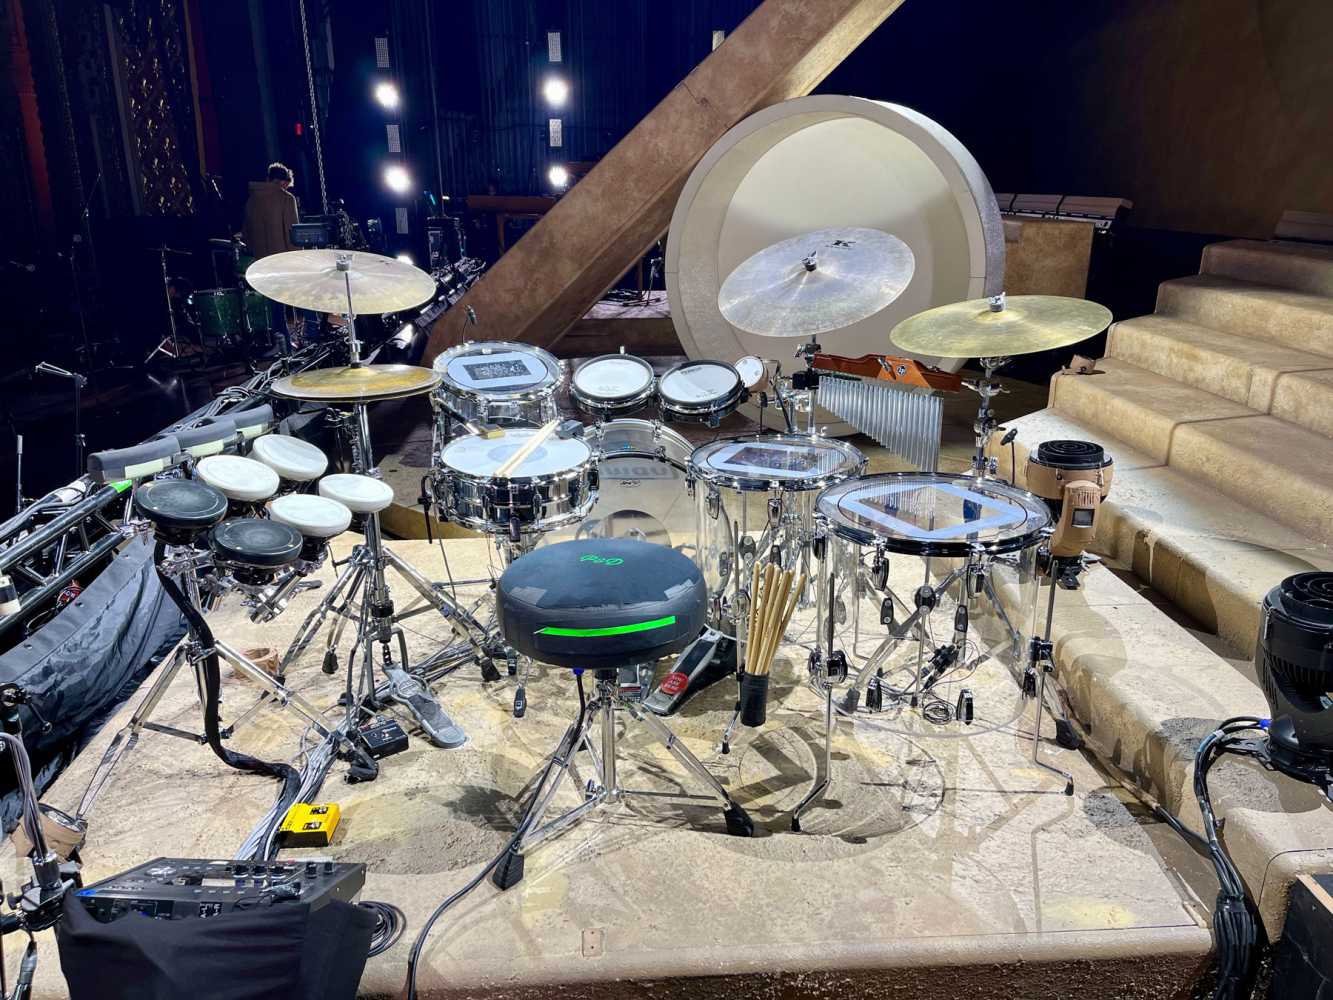 DPA mics are used on nearly the entire Lorde drum kit